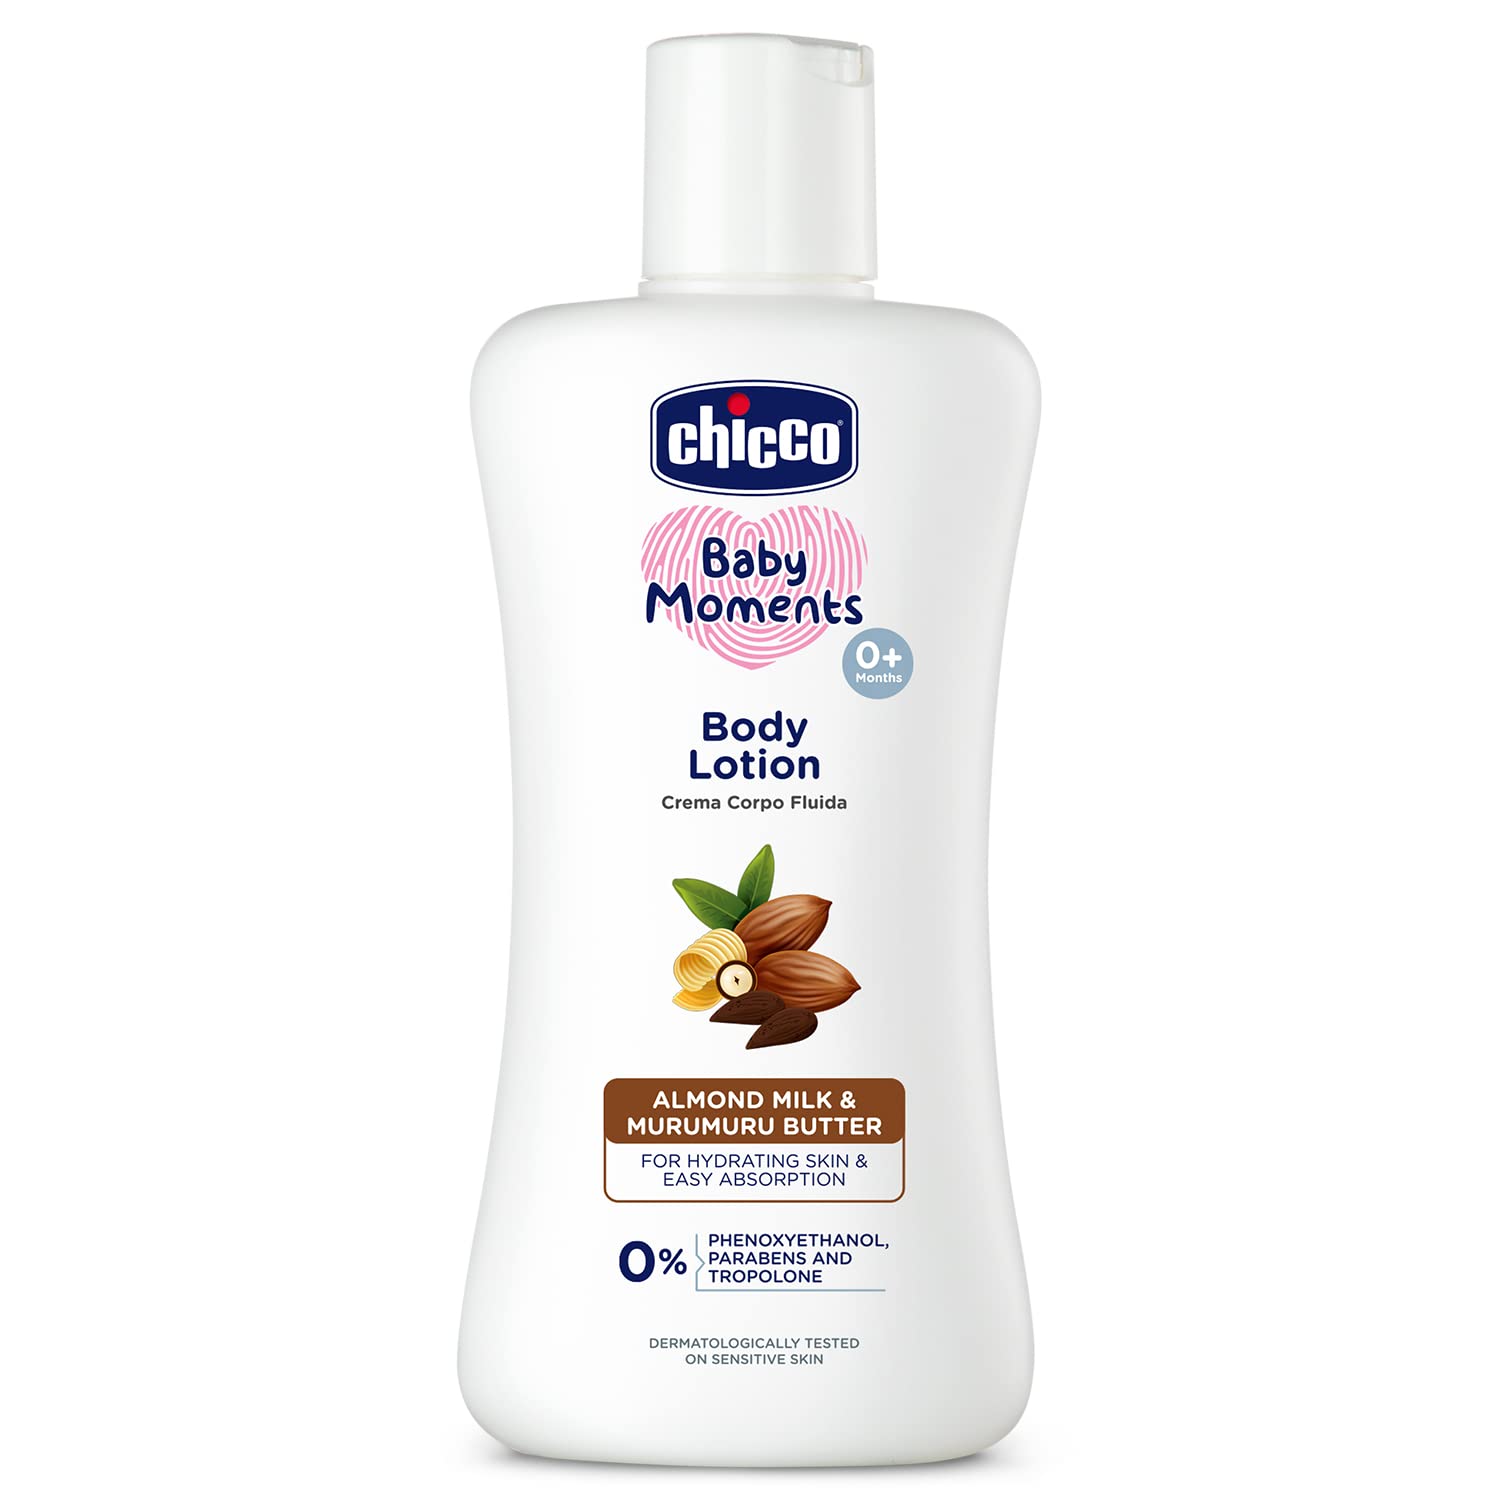 Chicco Baby Moments Body Lotion, New Advanced Formula with Natural Ingredients for Daily Moisturization, Suitable for Baby’s moisturized Skin,